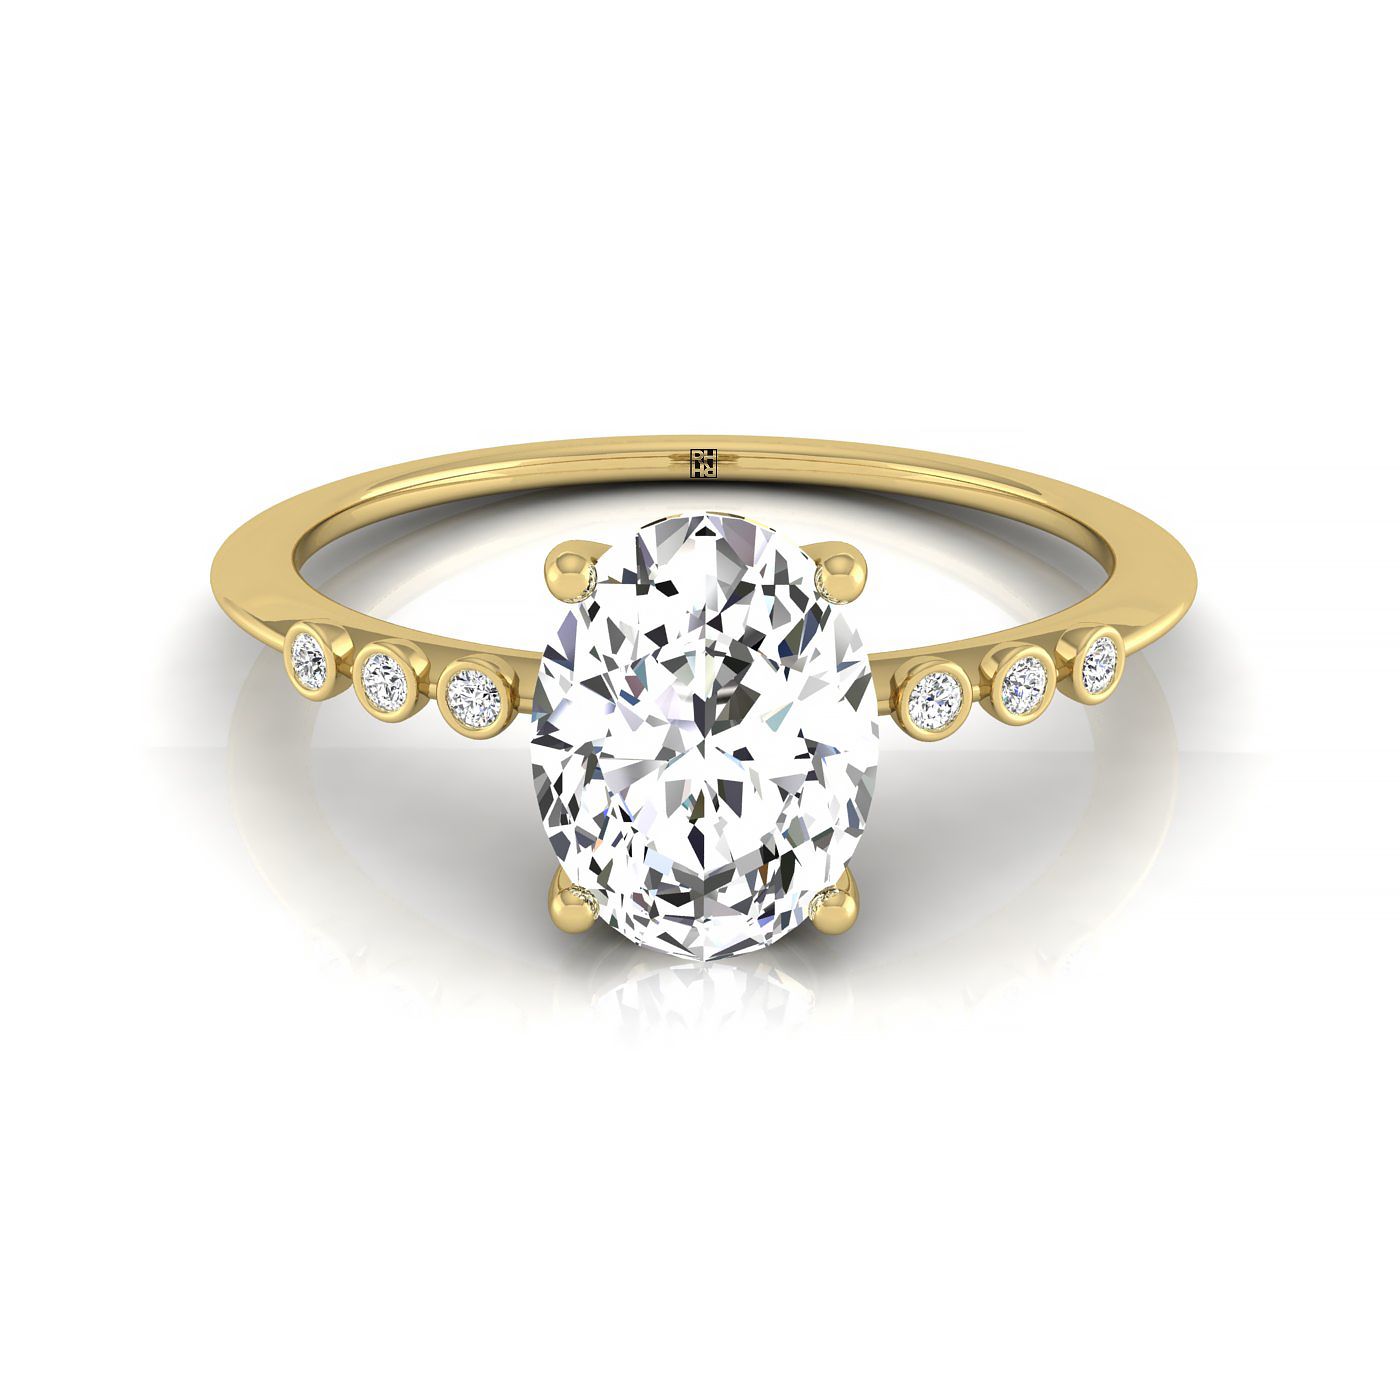 18ky Oval Engagement Ring With 6 Bezel Set Round Diamonds On Shank